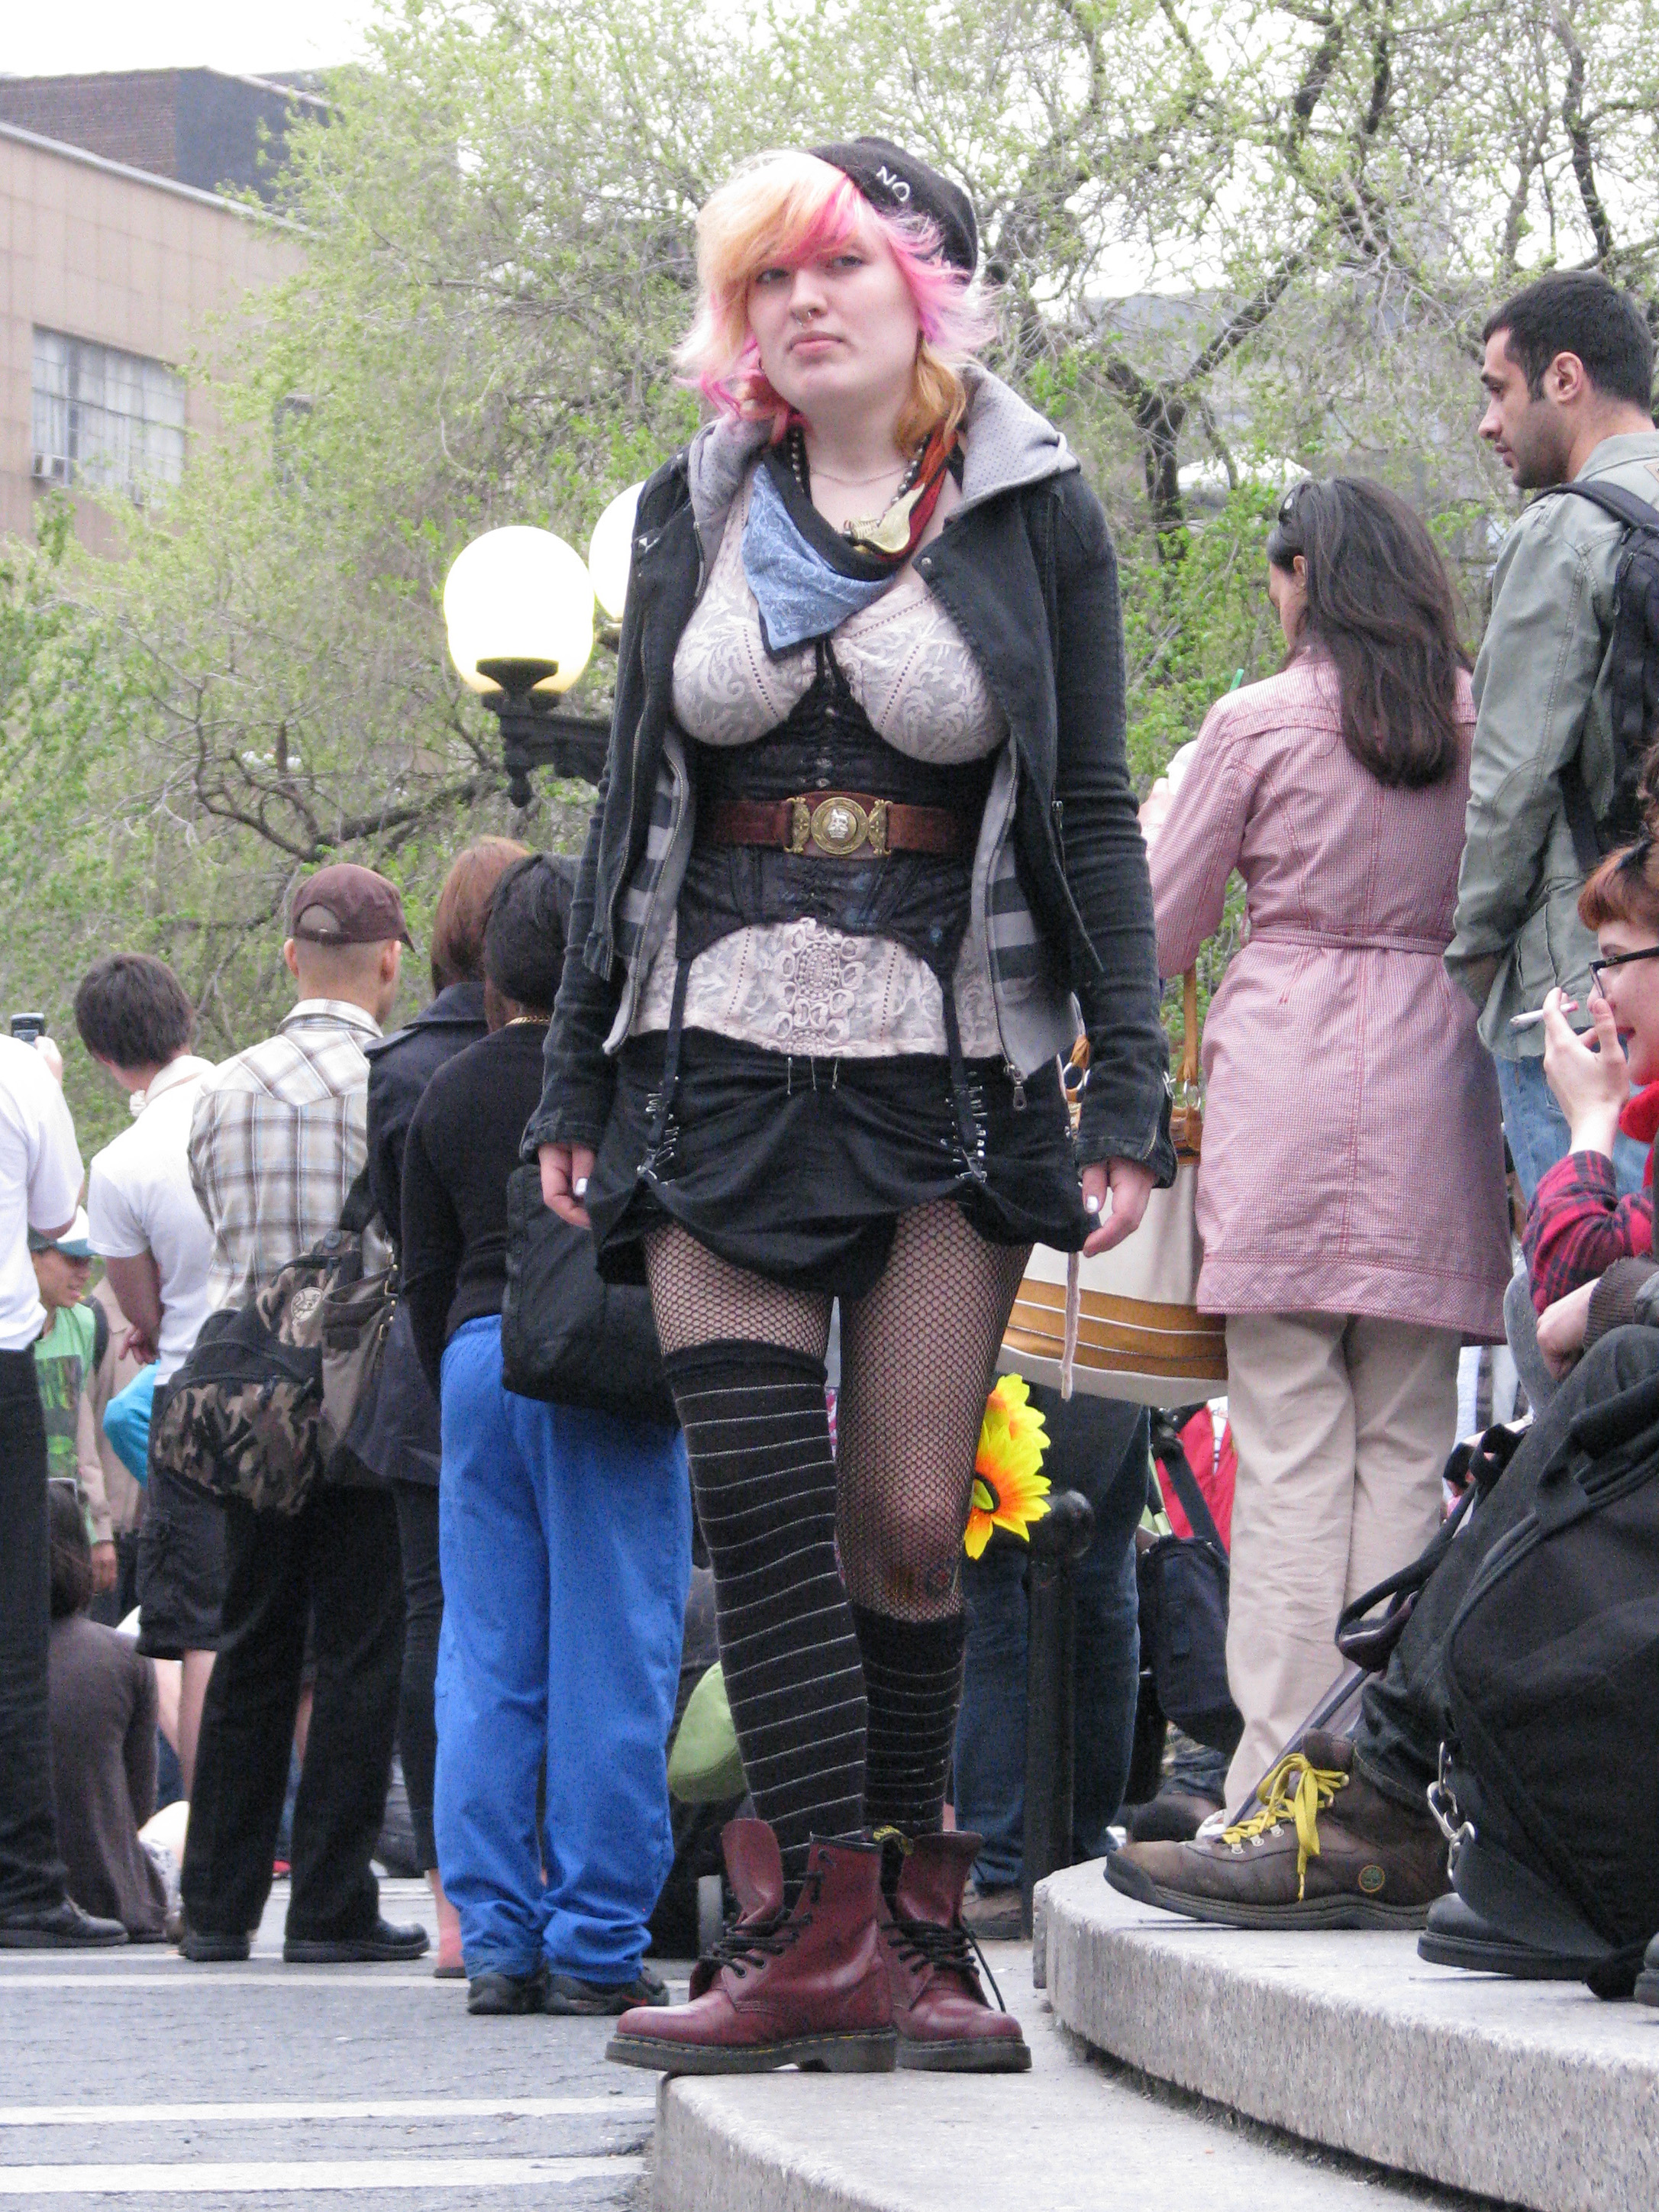 Girl wearing corset on top of her clothes